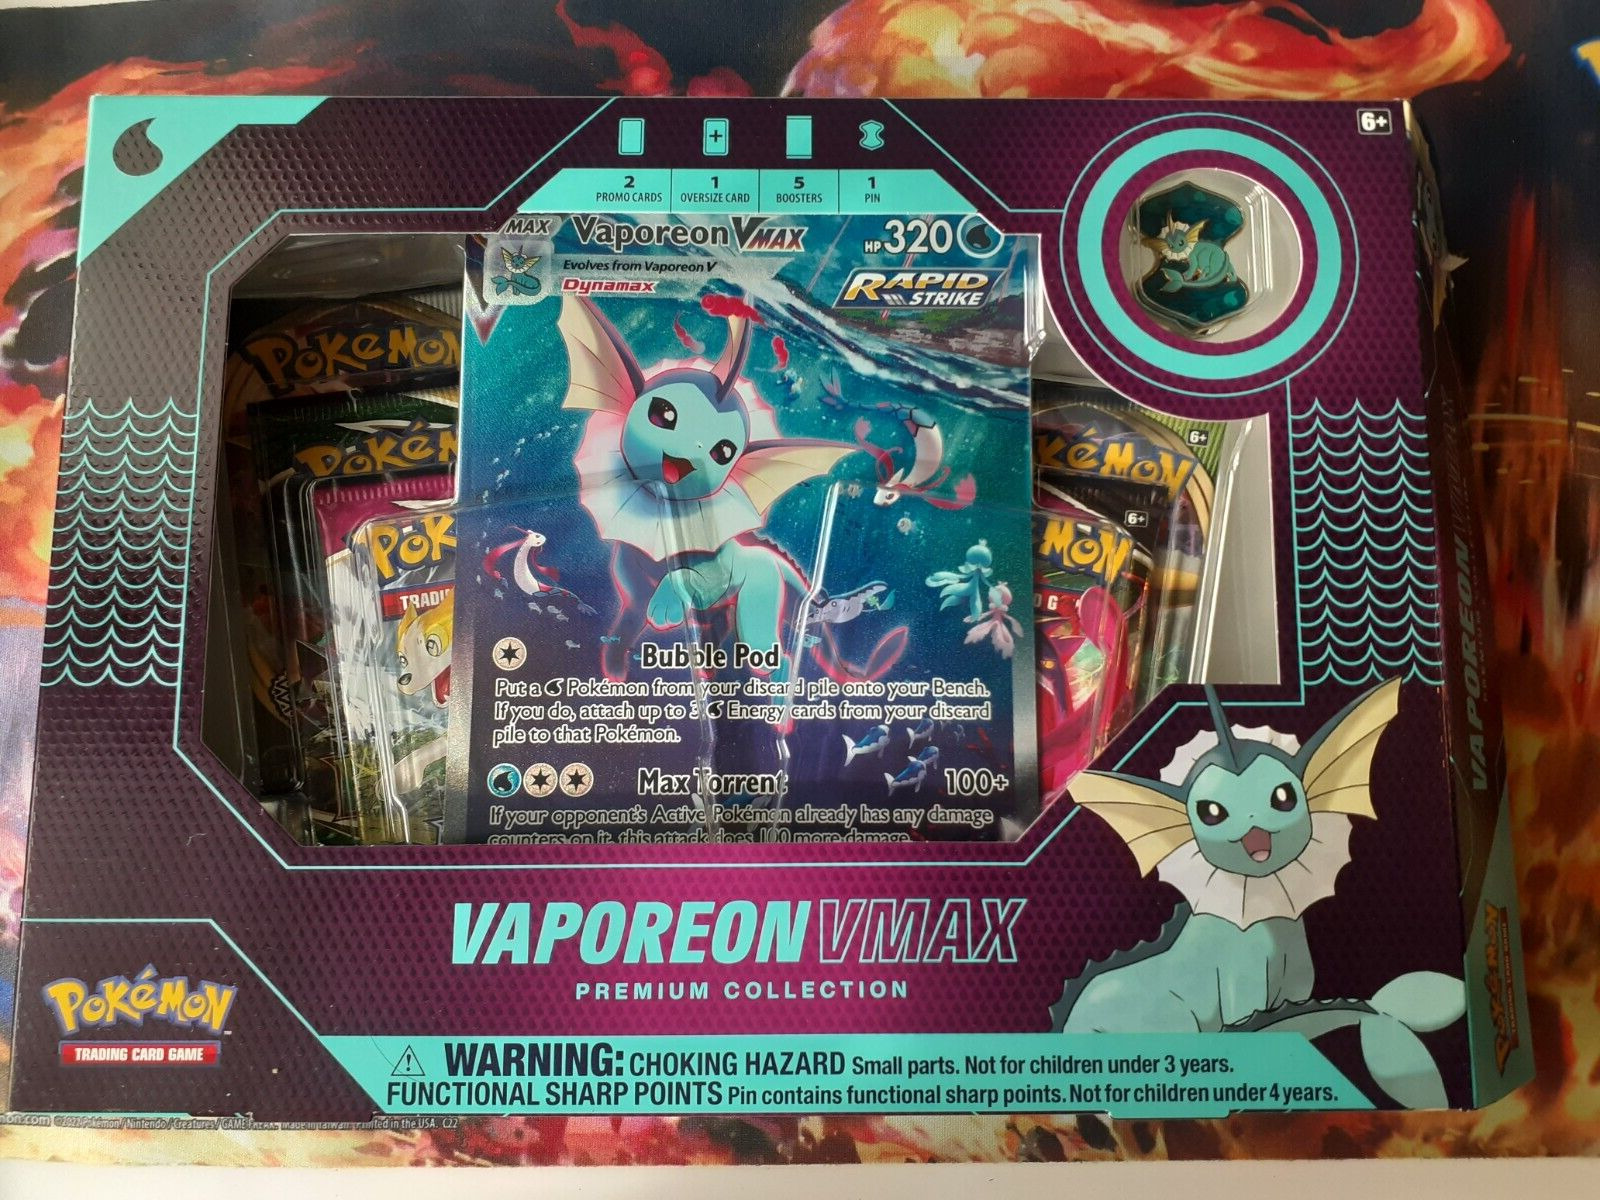 Vaporeon Pokemon VMAX Premium Collection Box OPENED-Everything but the two promo